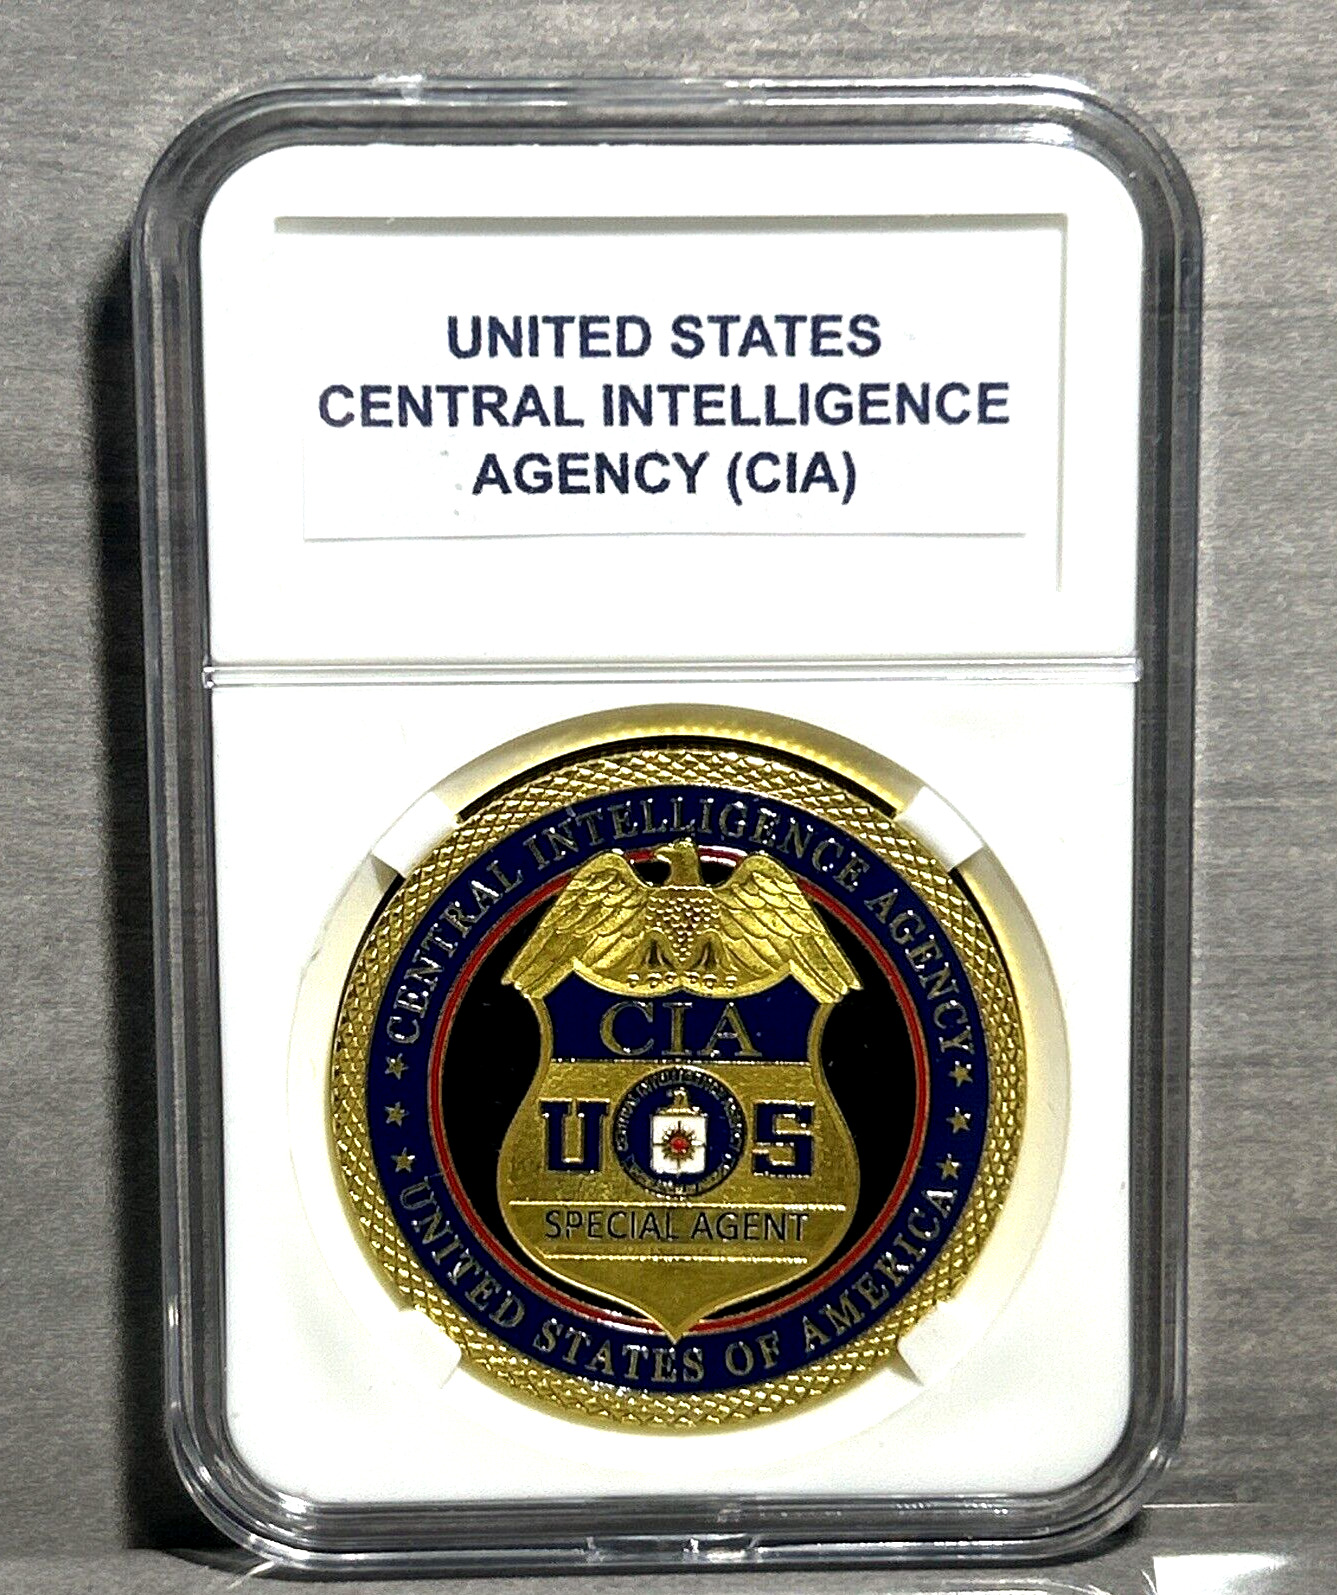 CIA United States Central Intelligence Agency Special Agent Challenge Coin G-20